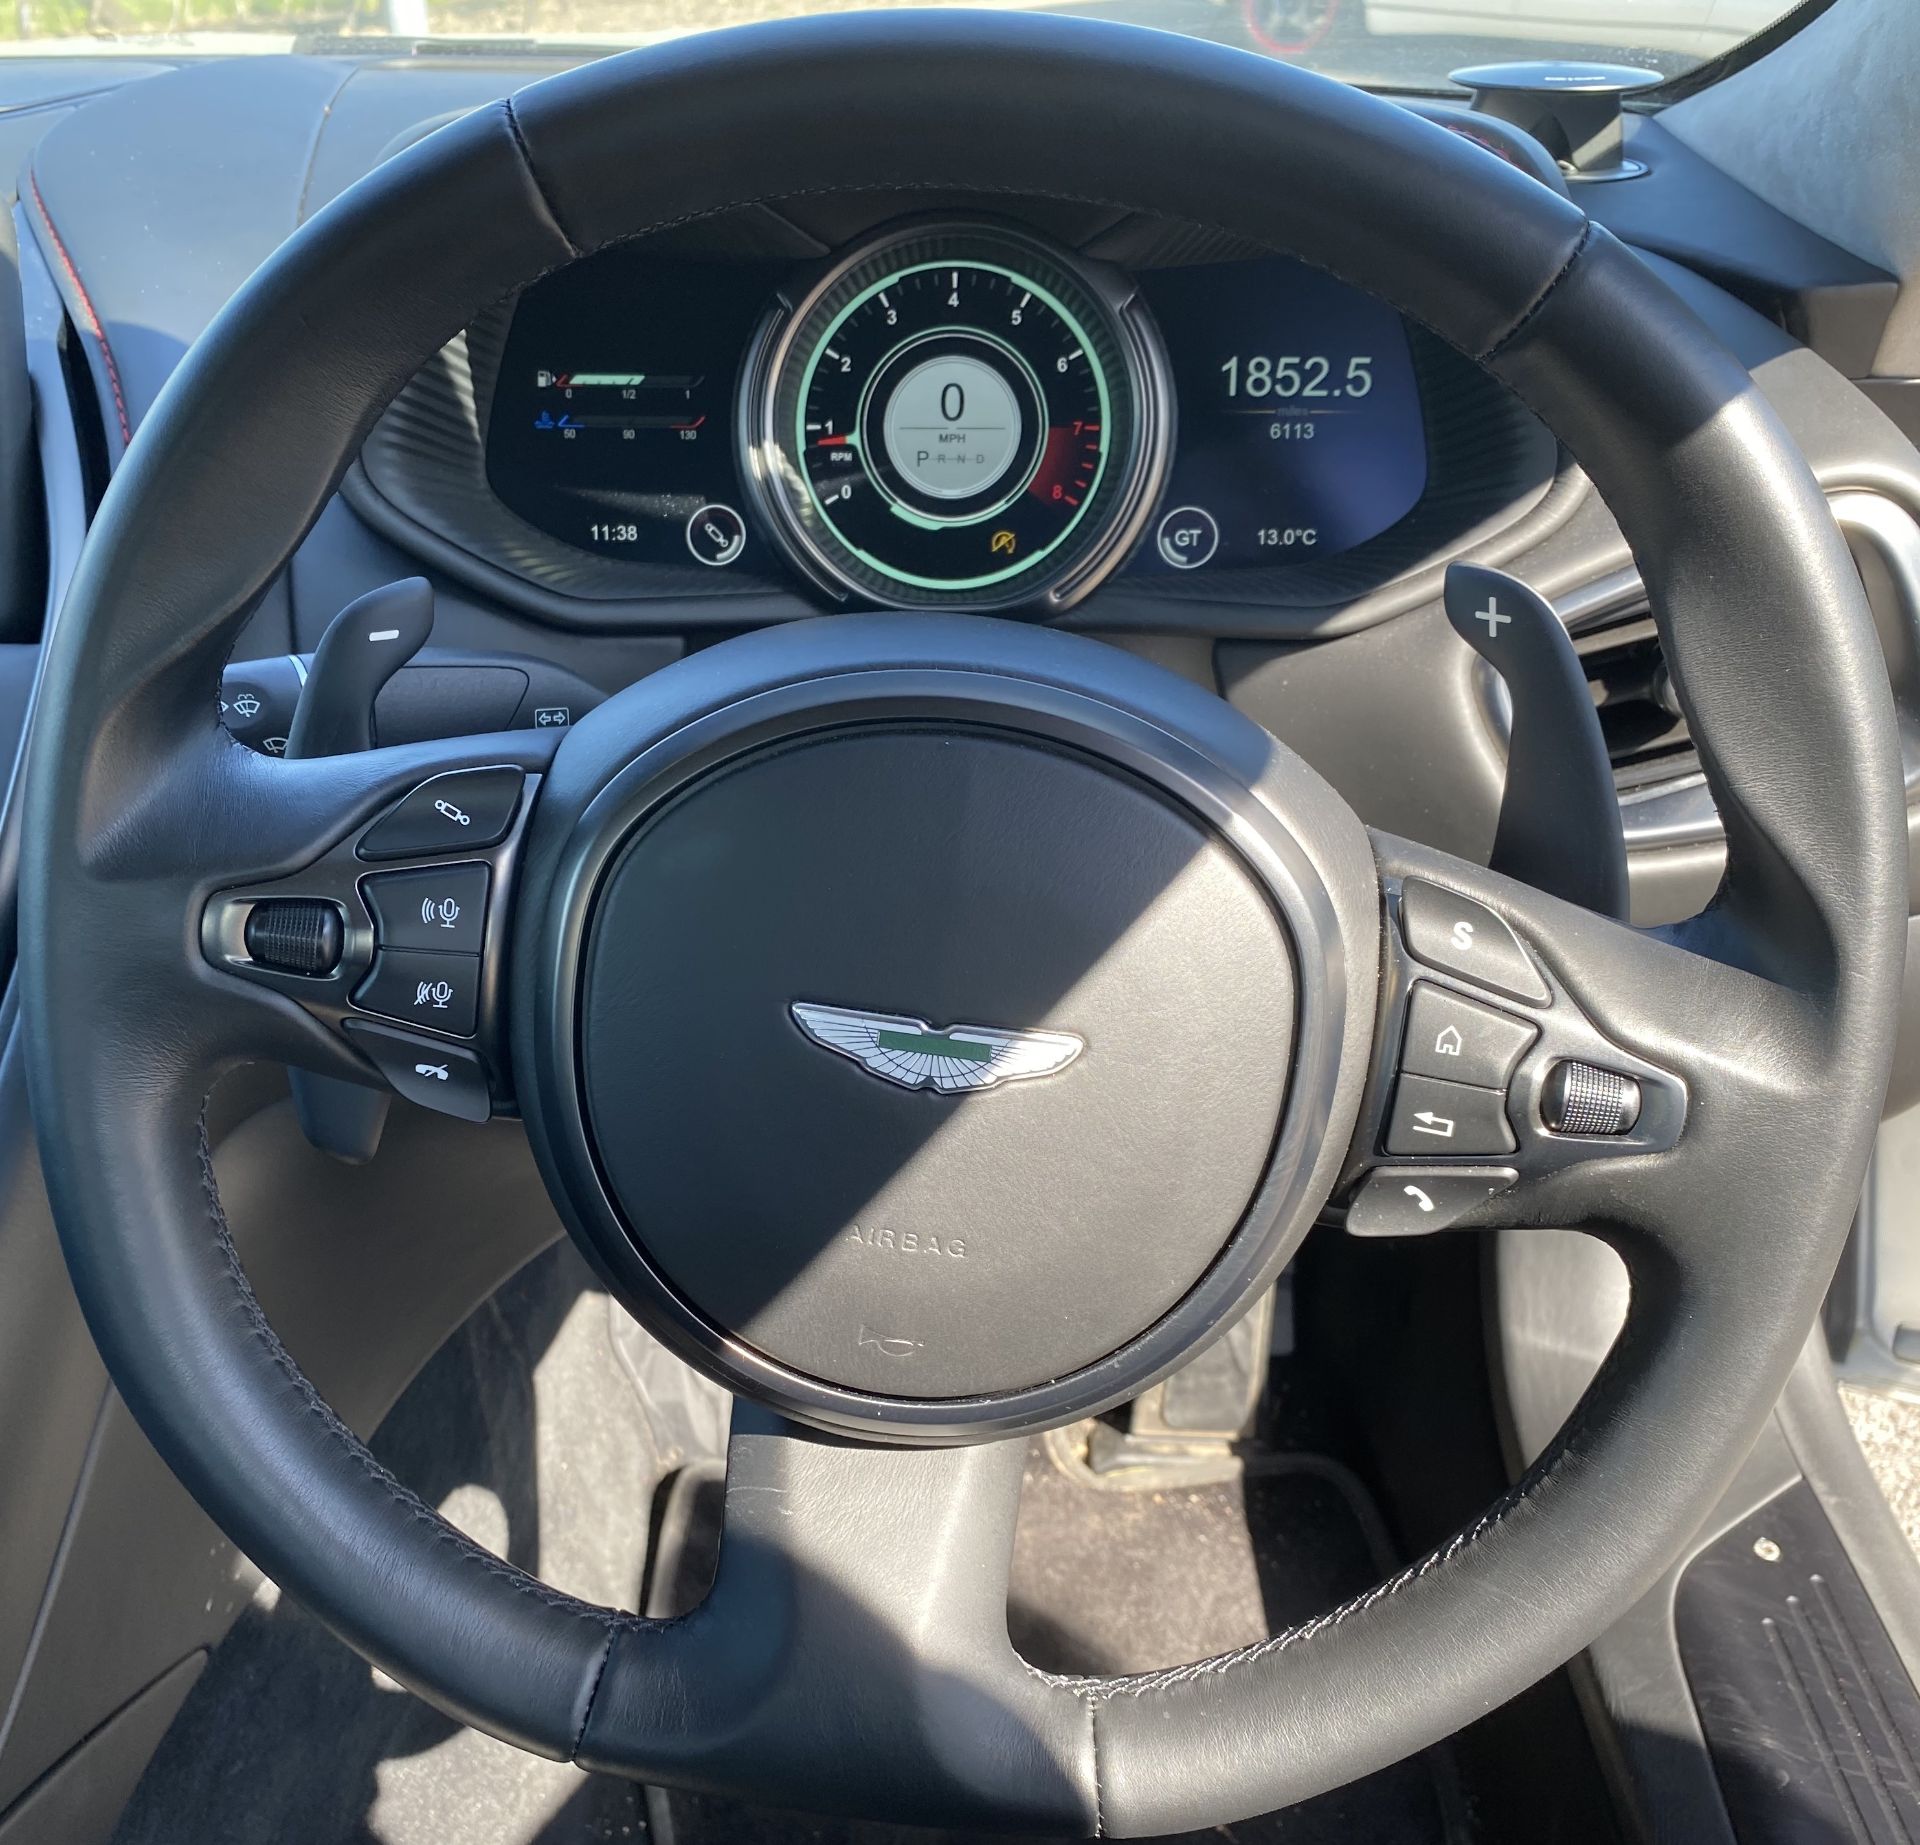 ASTON MARTIN DB11 V8 AUTOMATIC (3982cc) COUPE - 8 speed automatic - petrol - silver - dark - Image 59 of 68